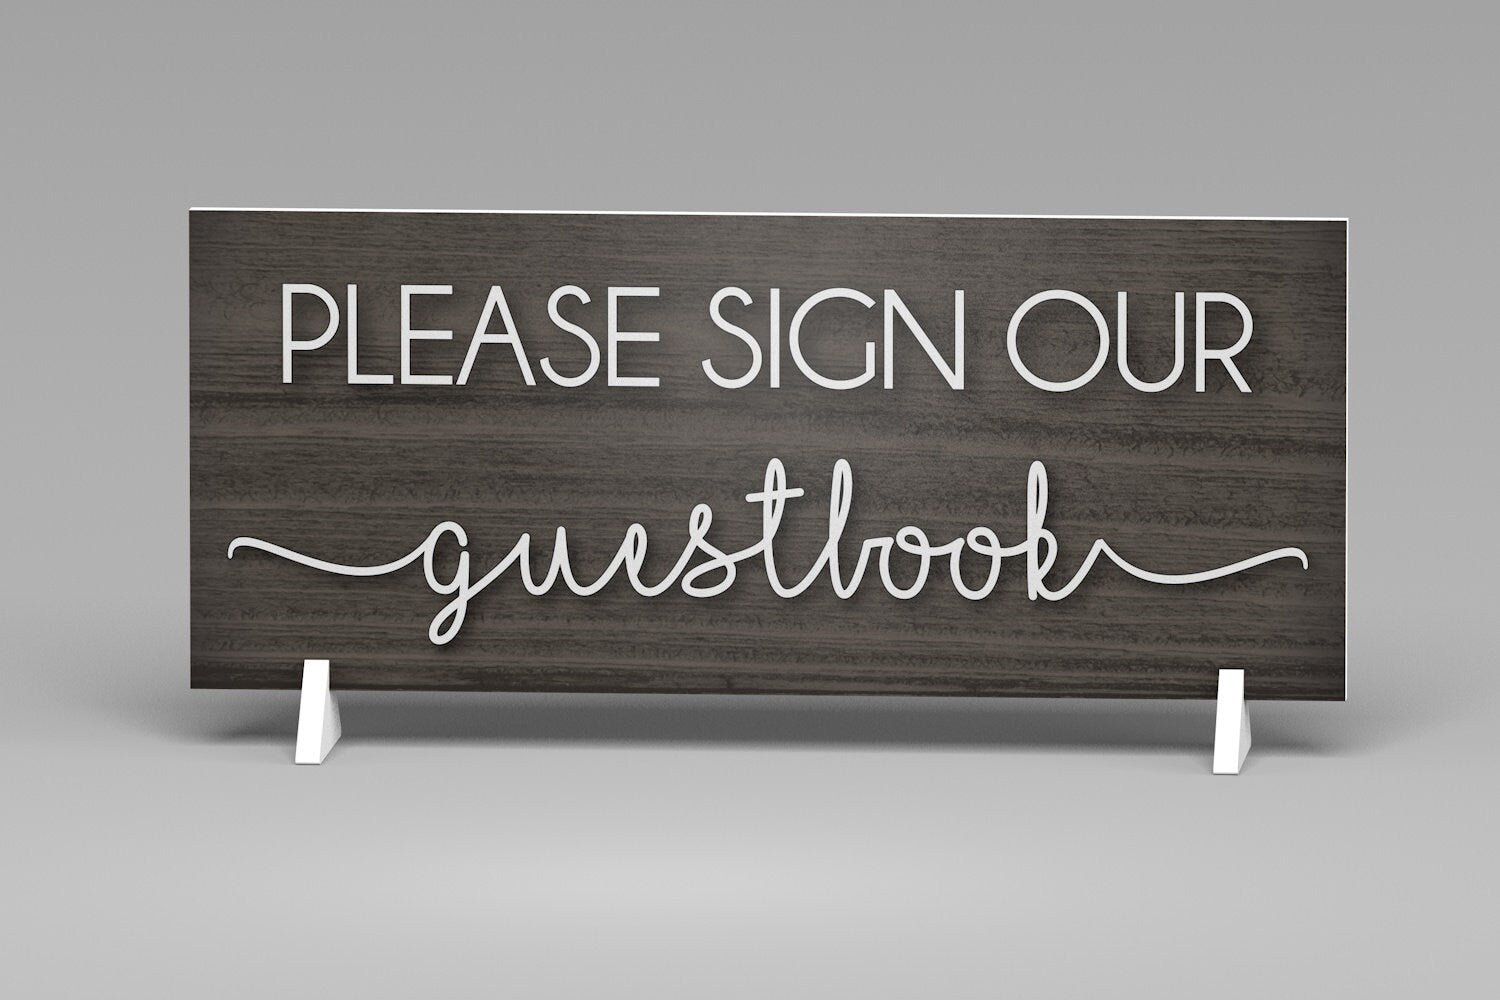 Please Sign Our Guestbook Wedding Sign, Guestbook Sign, Wedding Reception Sign, Wedding Table Sign